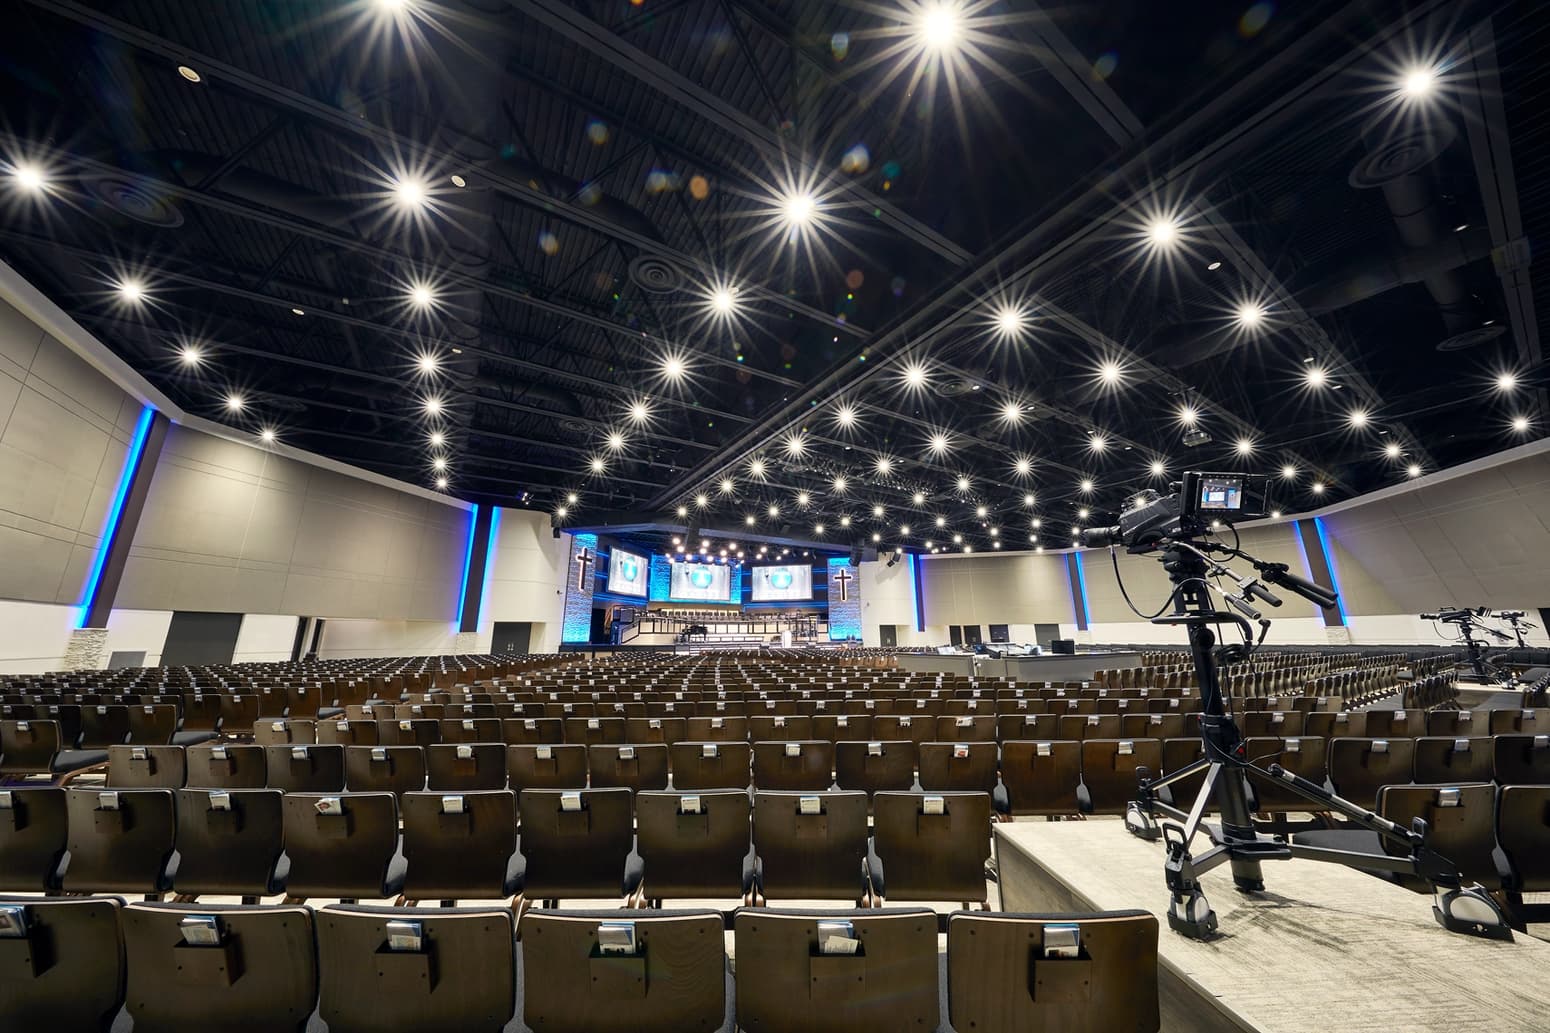 Seating at FBC made new church sound systems crucial.